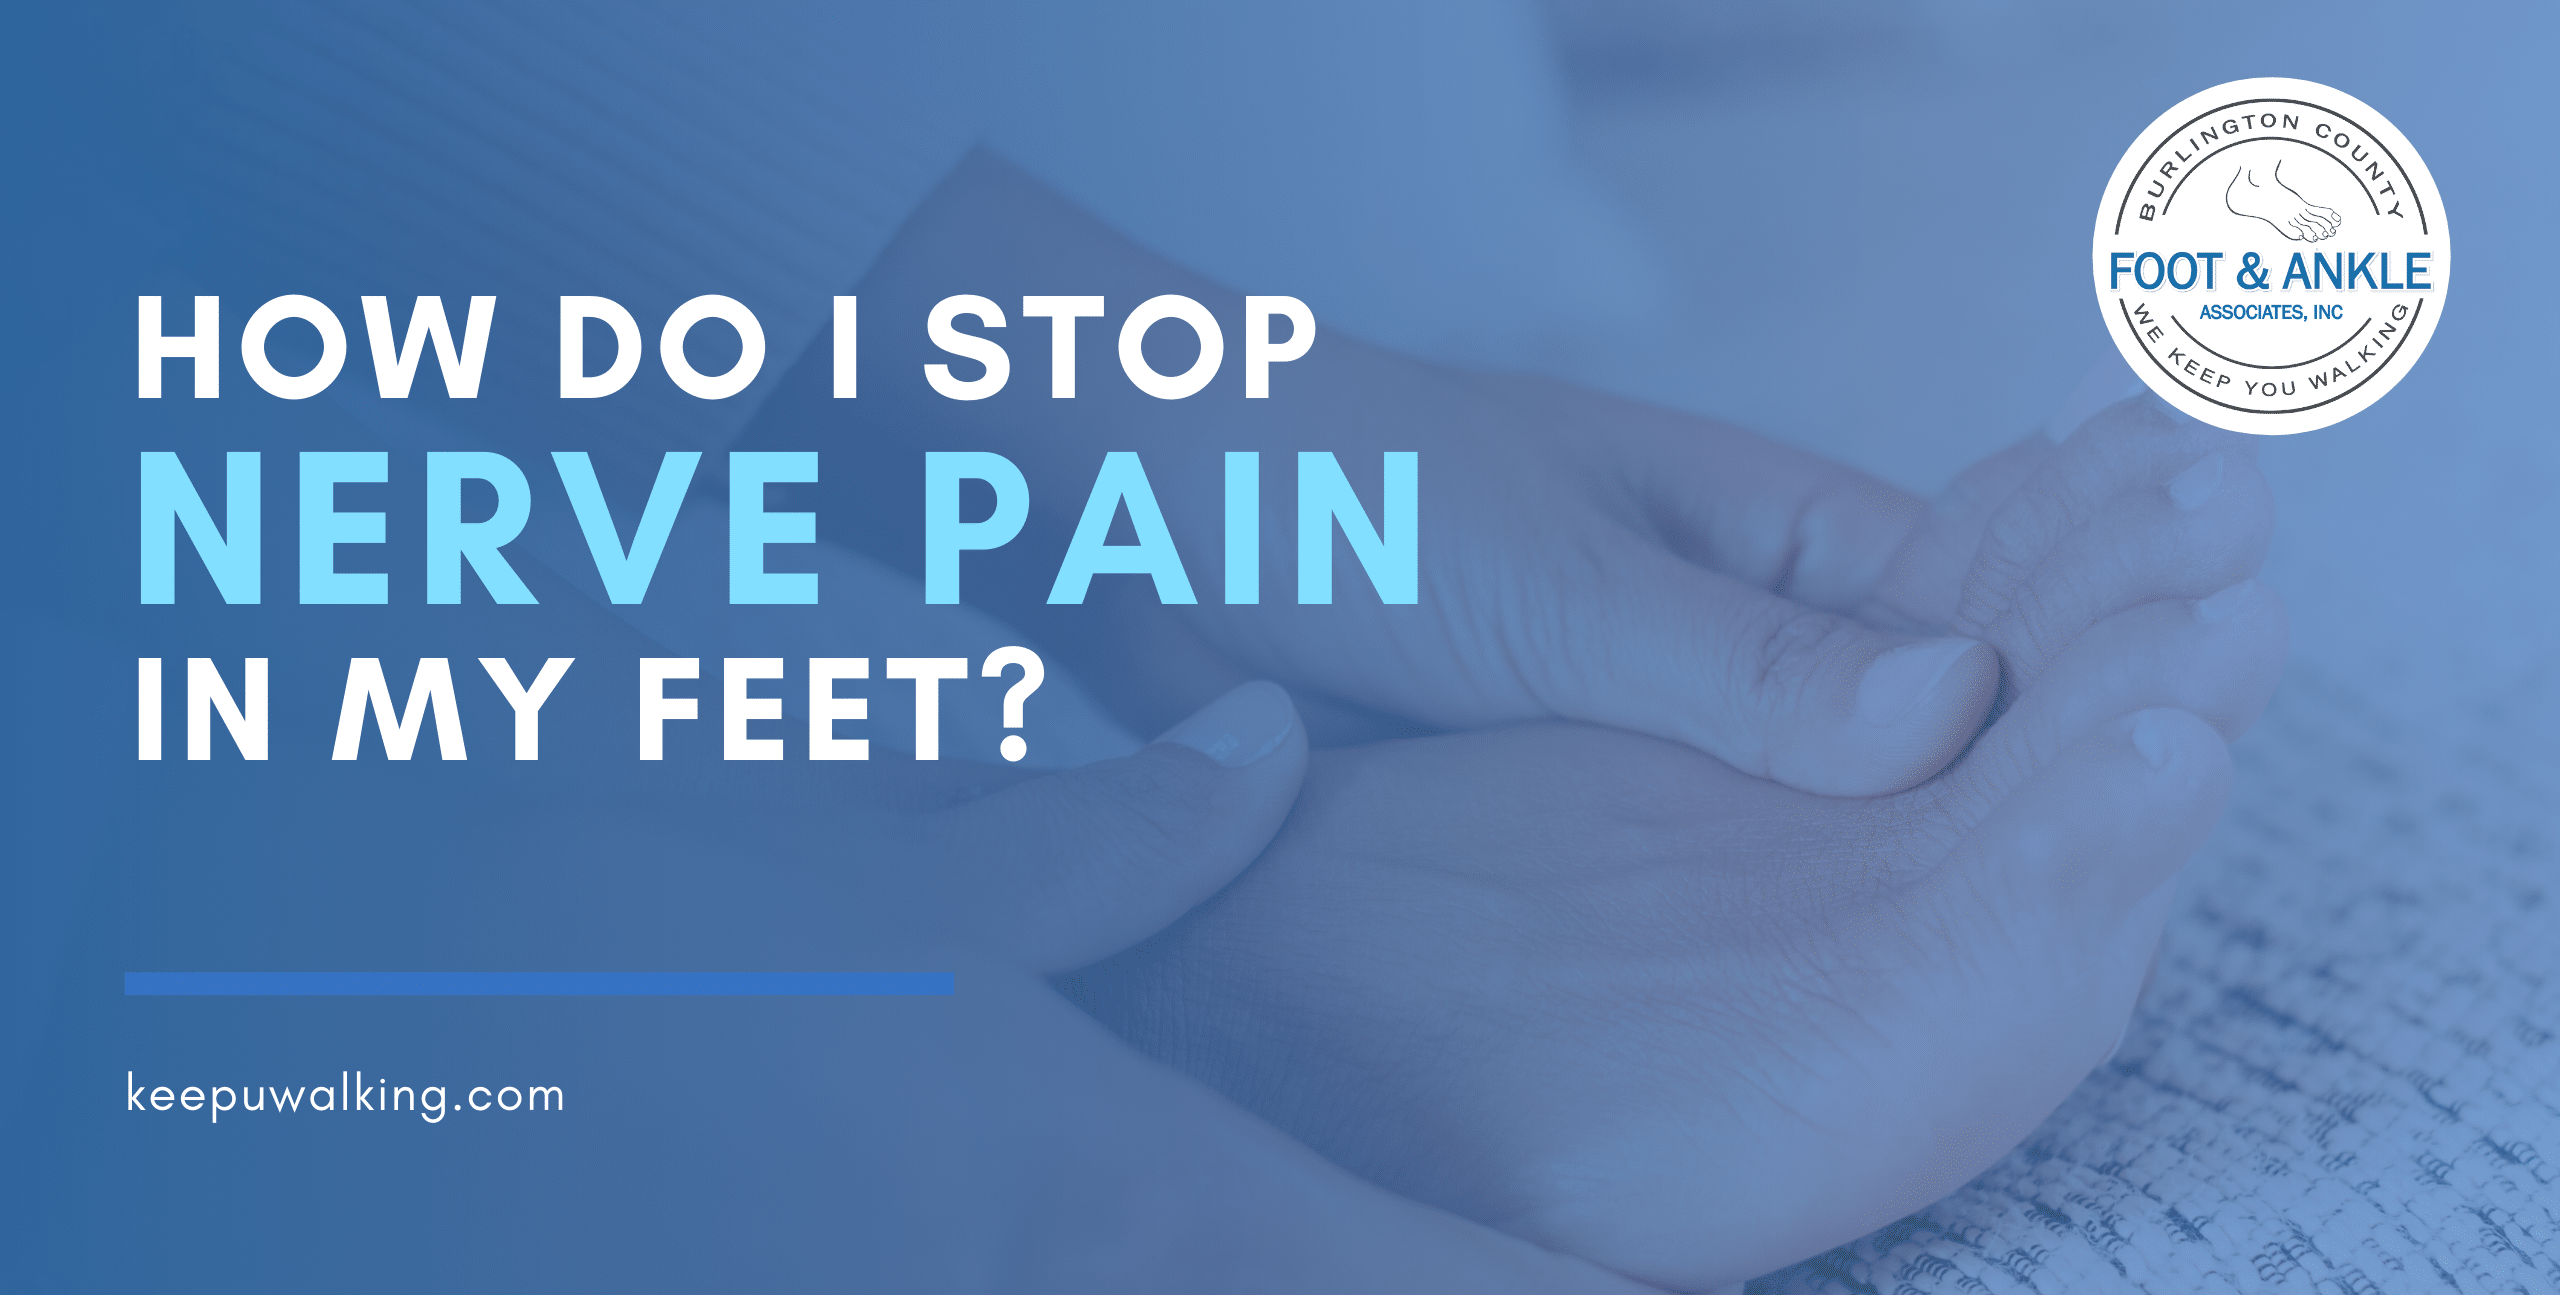 How Do I Stop Nerve Pain In My Feet?